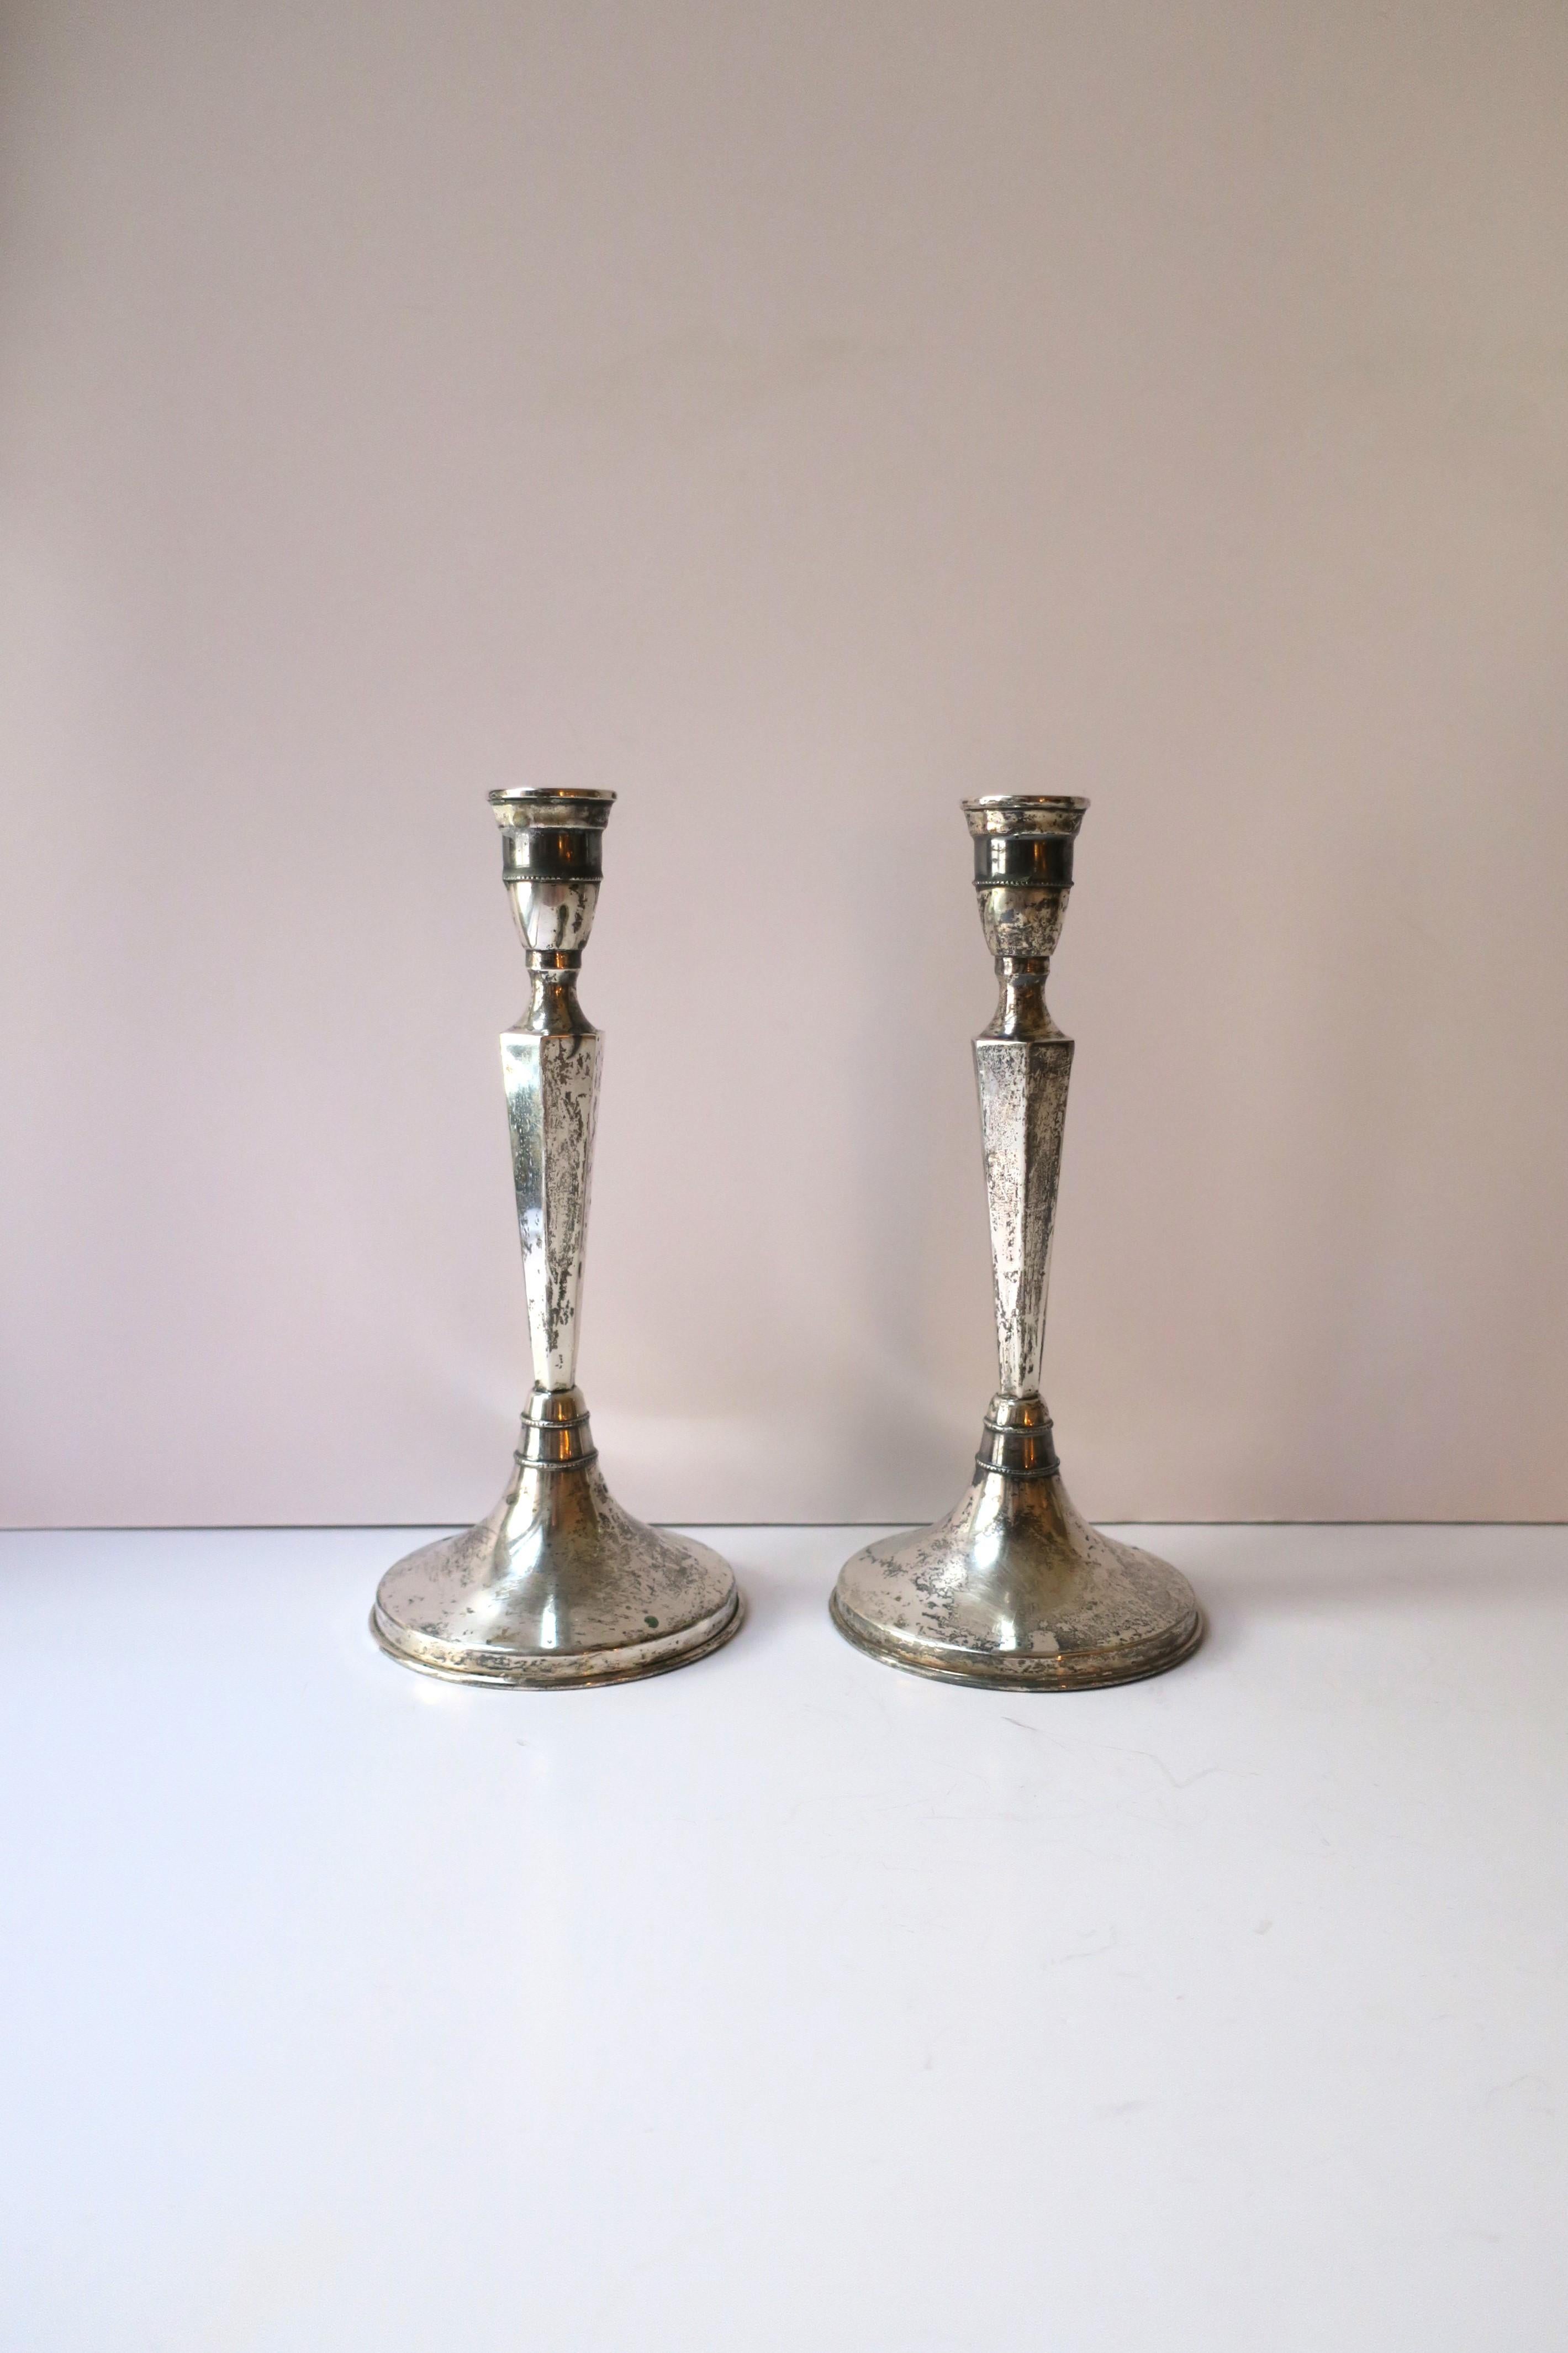 A pair of European continental silver candlesticks holders, circa early-20th century, Europe. Pair, lightweight in nature, have hexagon shape at center stem and tiny beadwork design around at top and bottom. A beautiful set with age and all. Set,